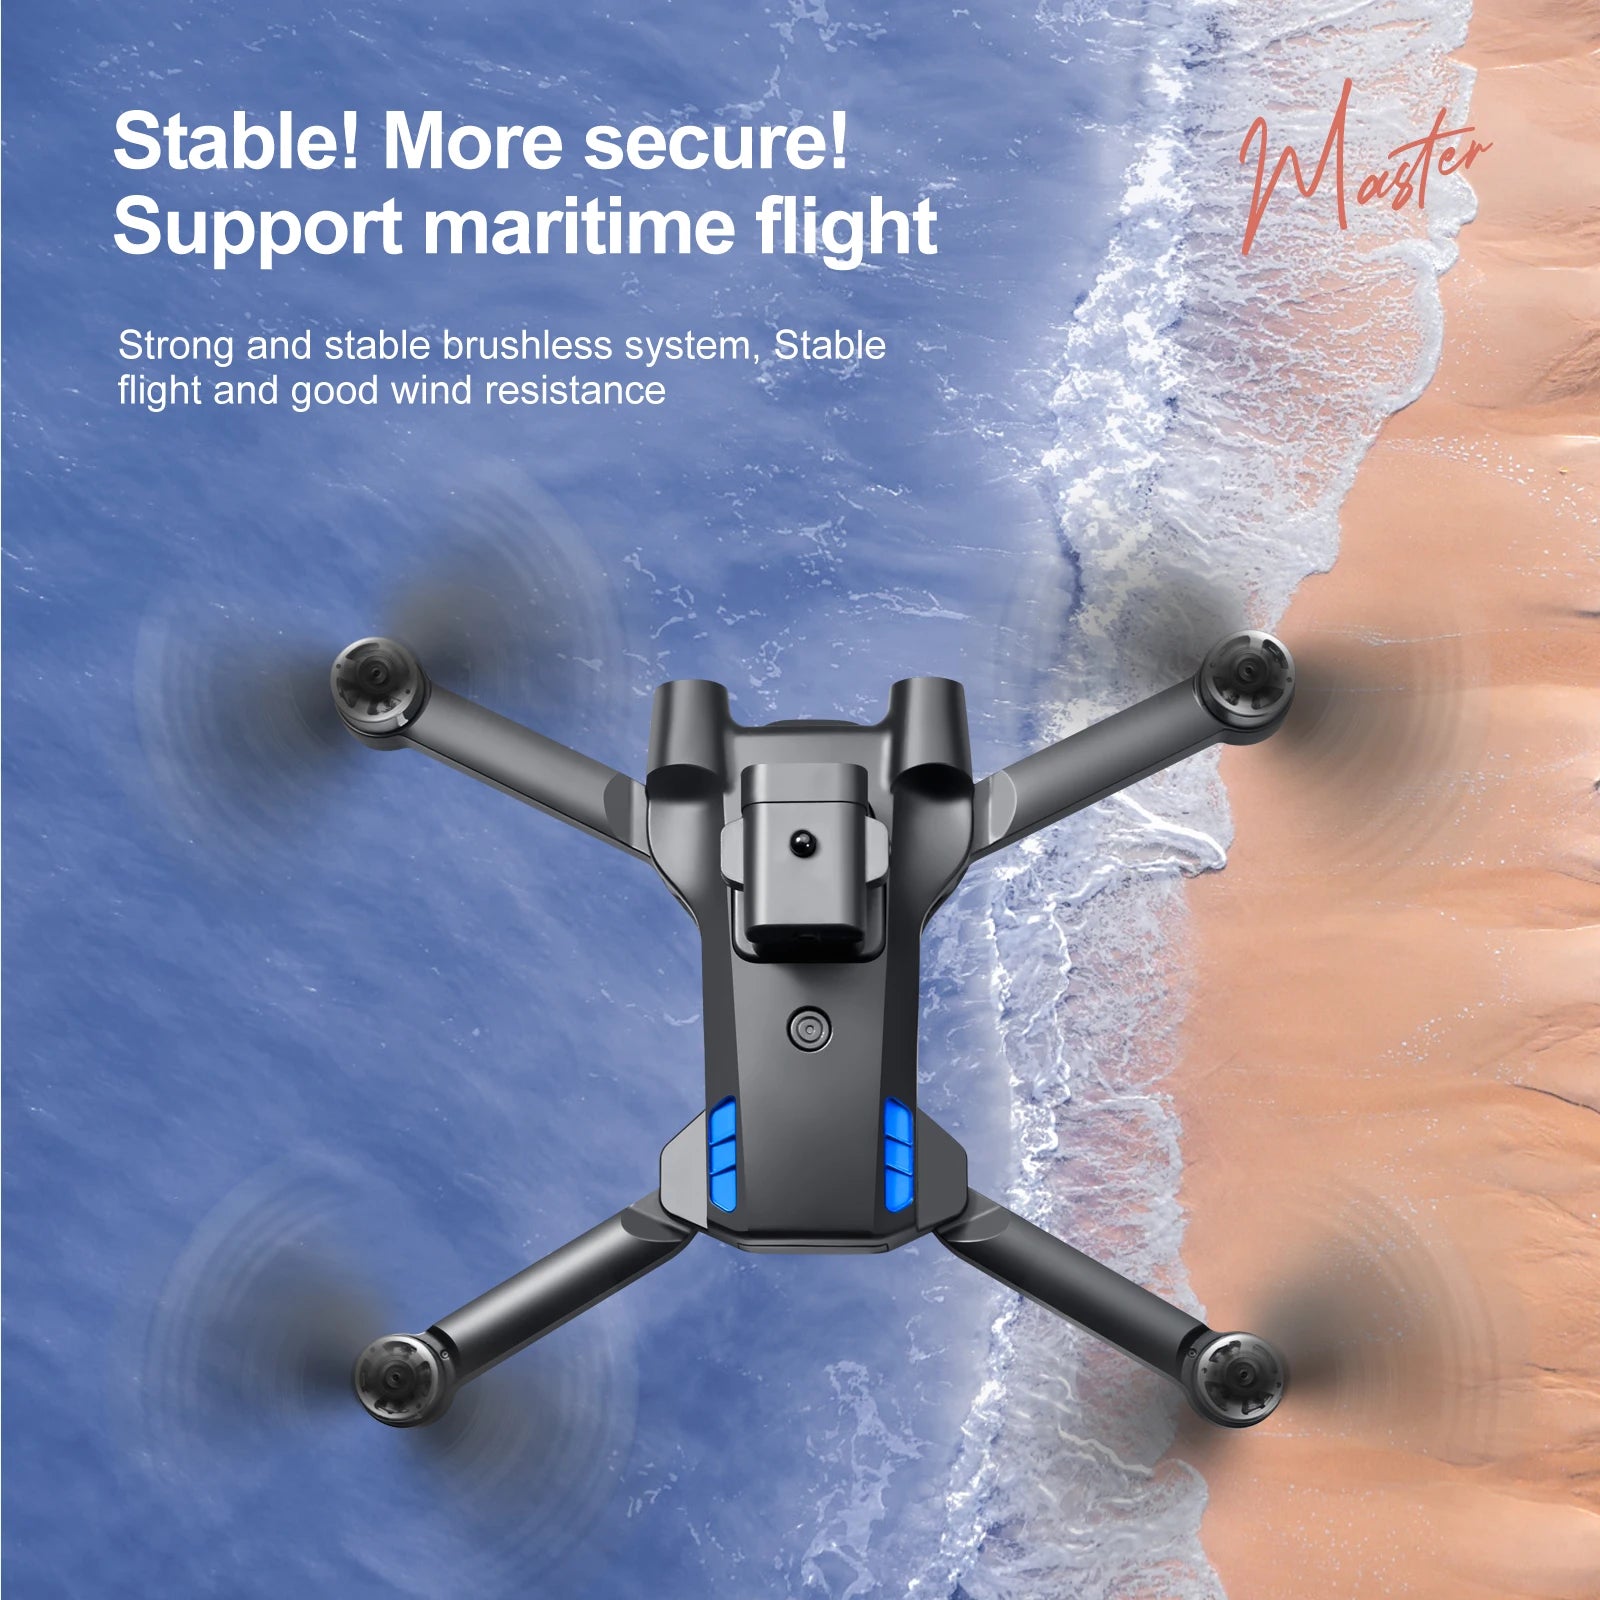 S136 GPS Drone, Stablel More securel Support maritime flight Strong and stable brushless system , Stable